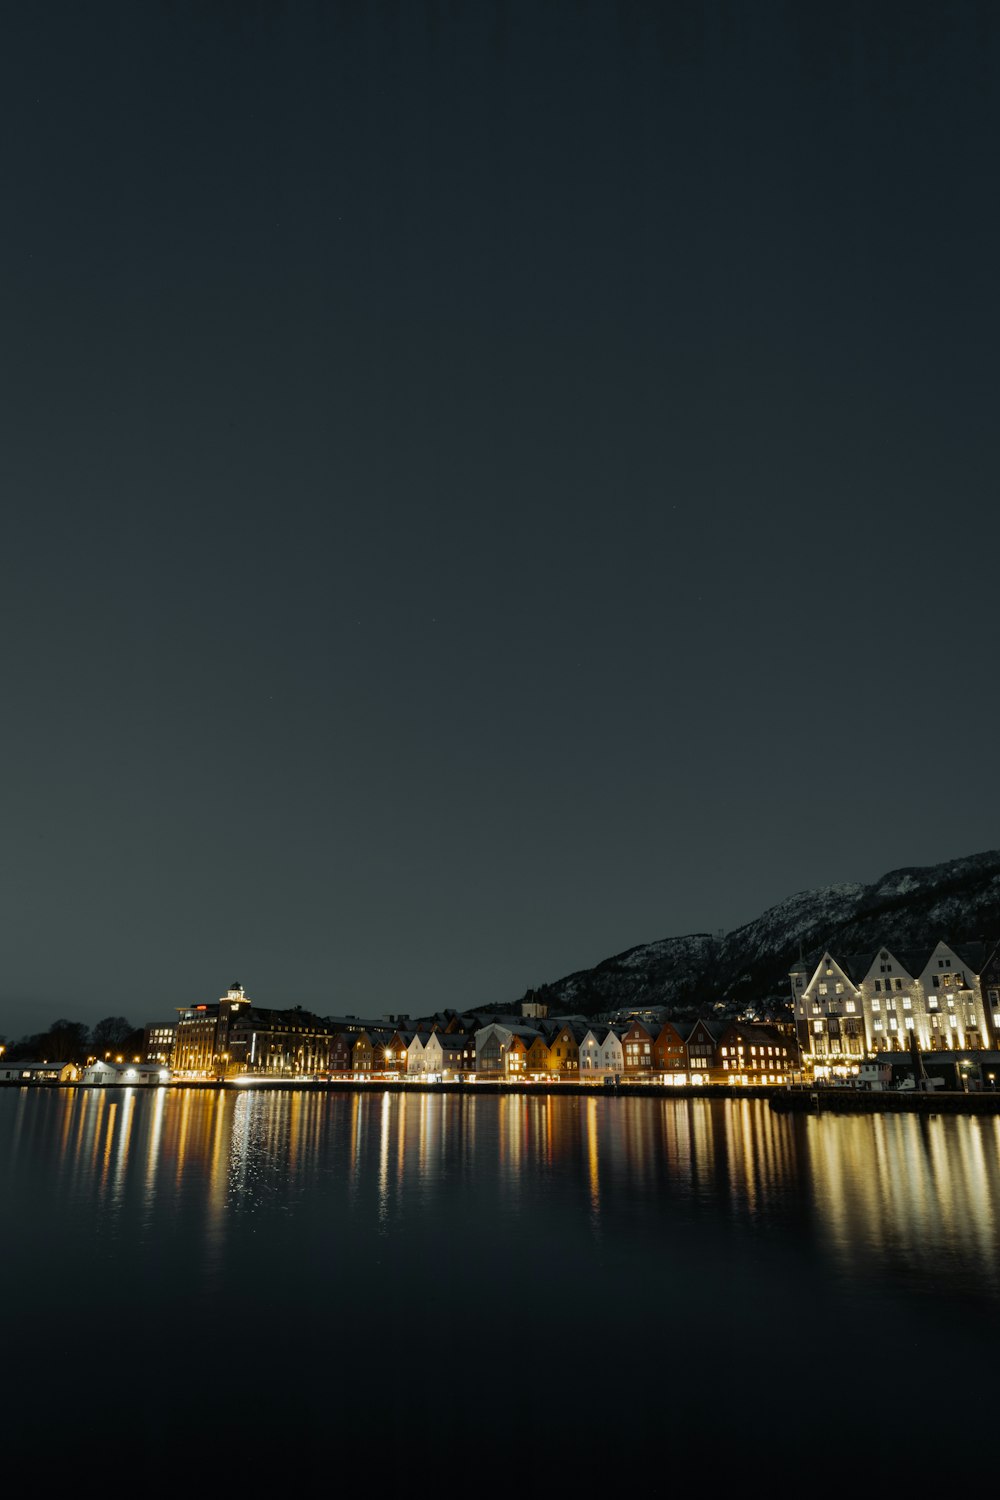 a night time view of a town on a lake